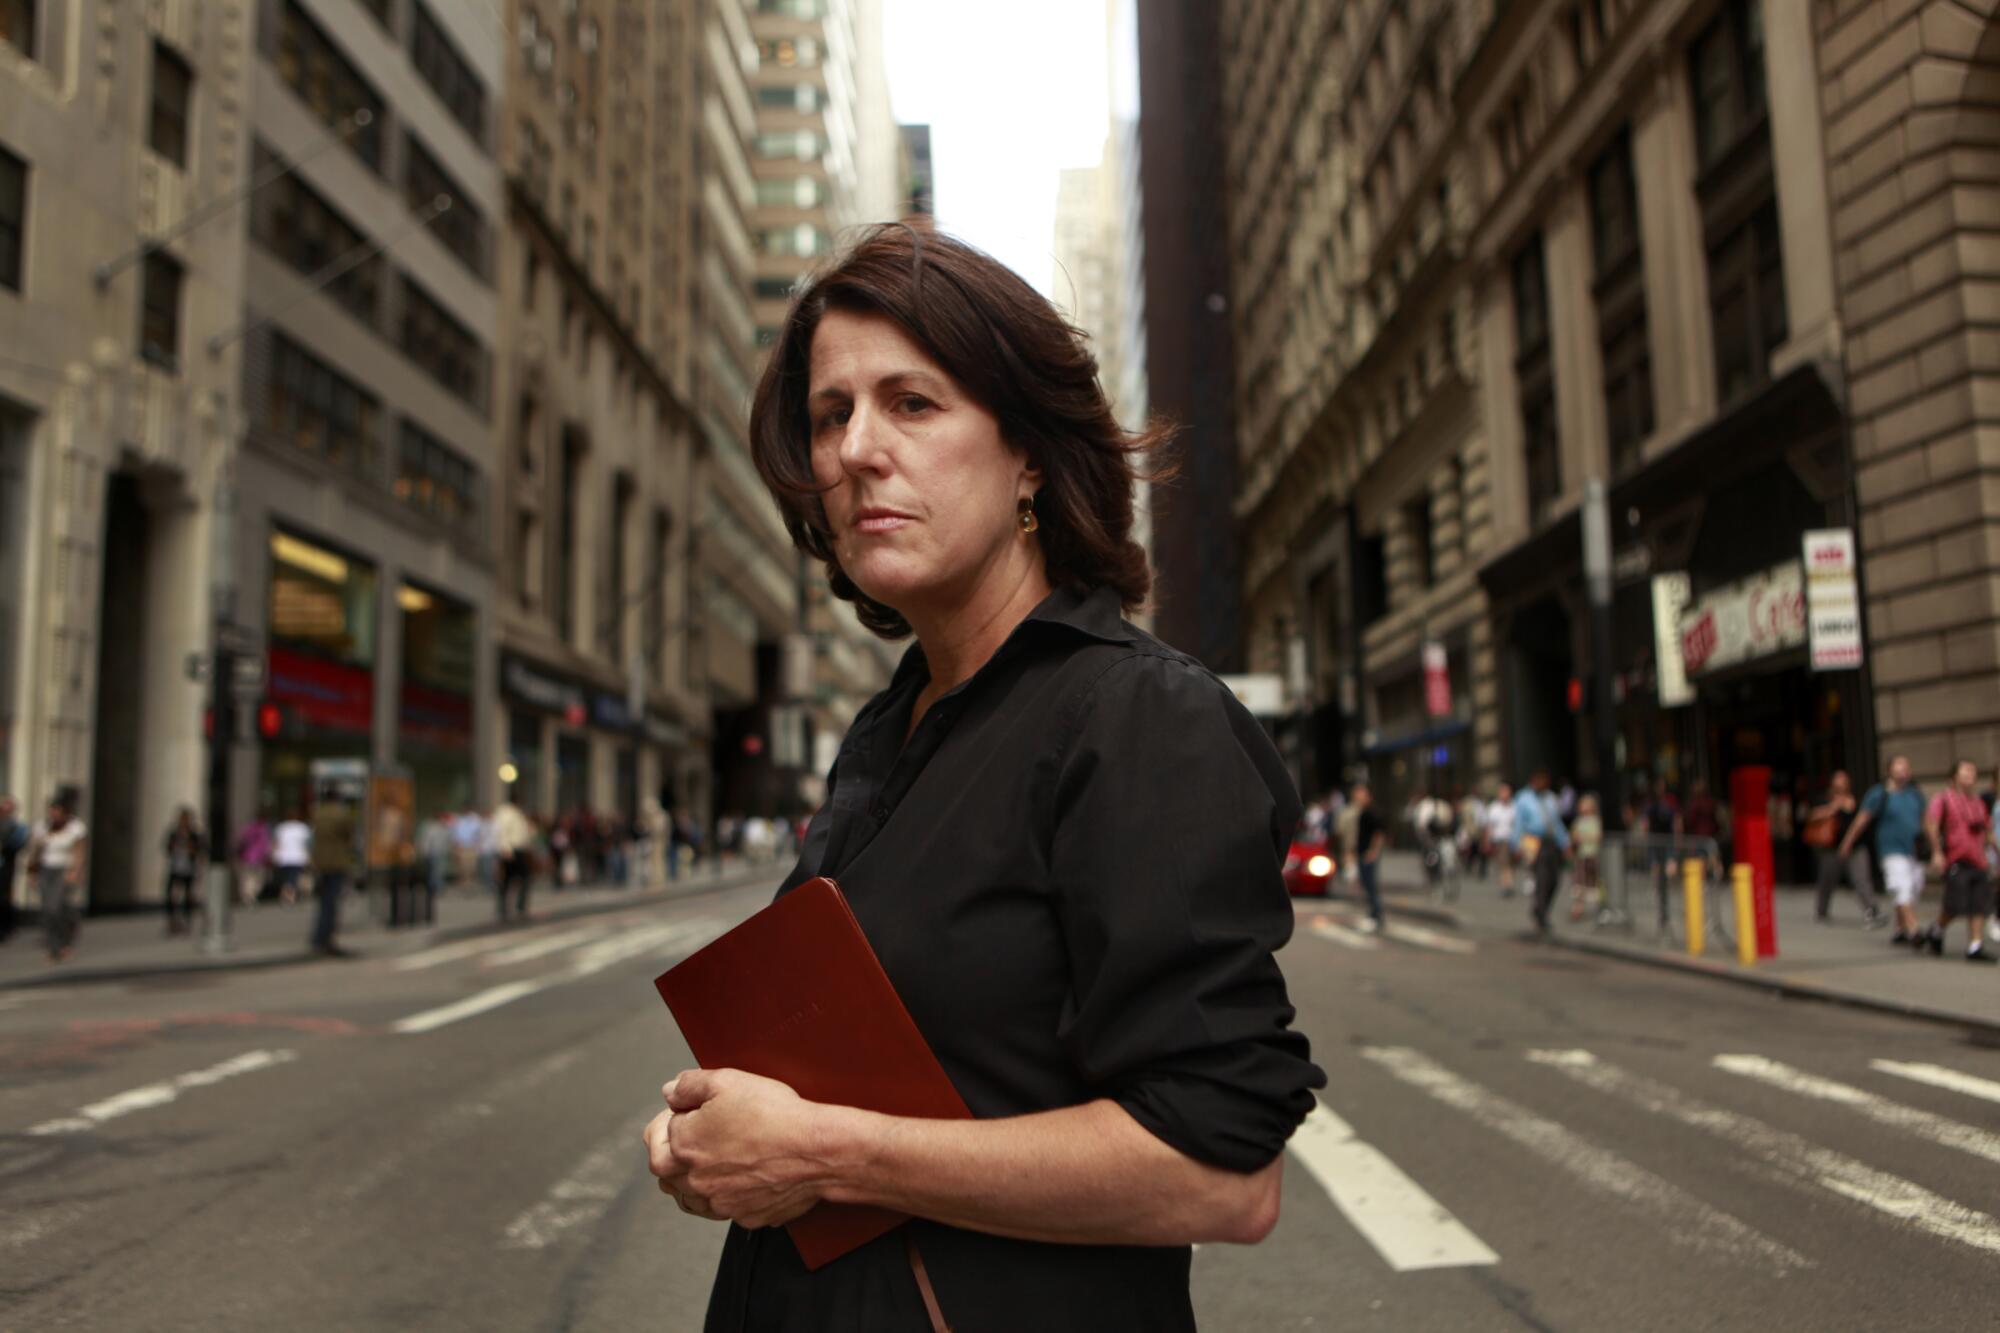 Geraldine Baum holds a diary while standing on a New York street